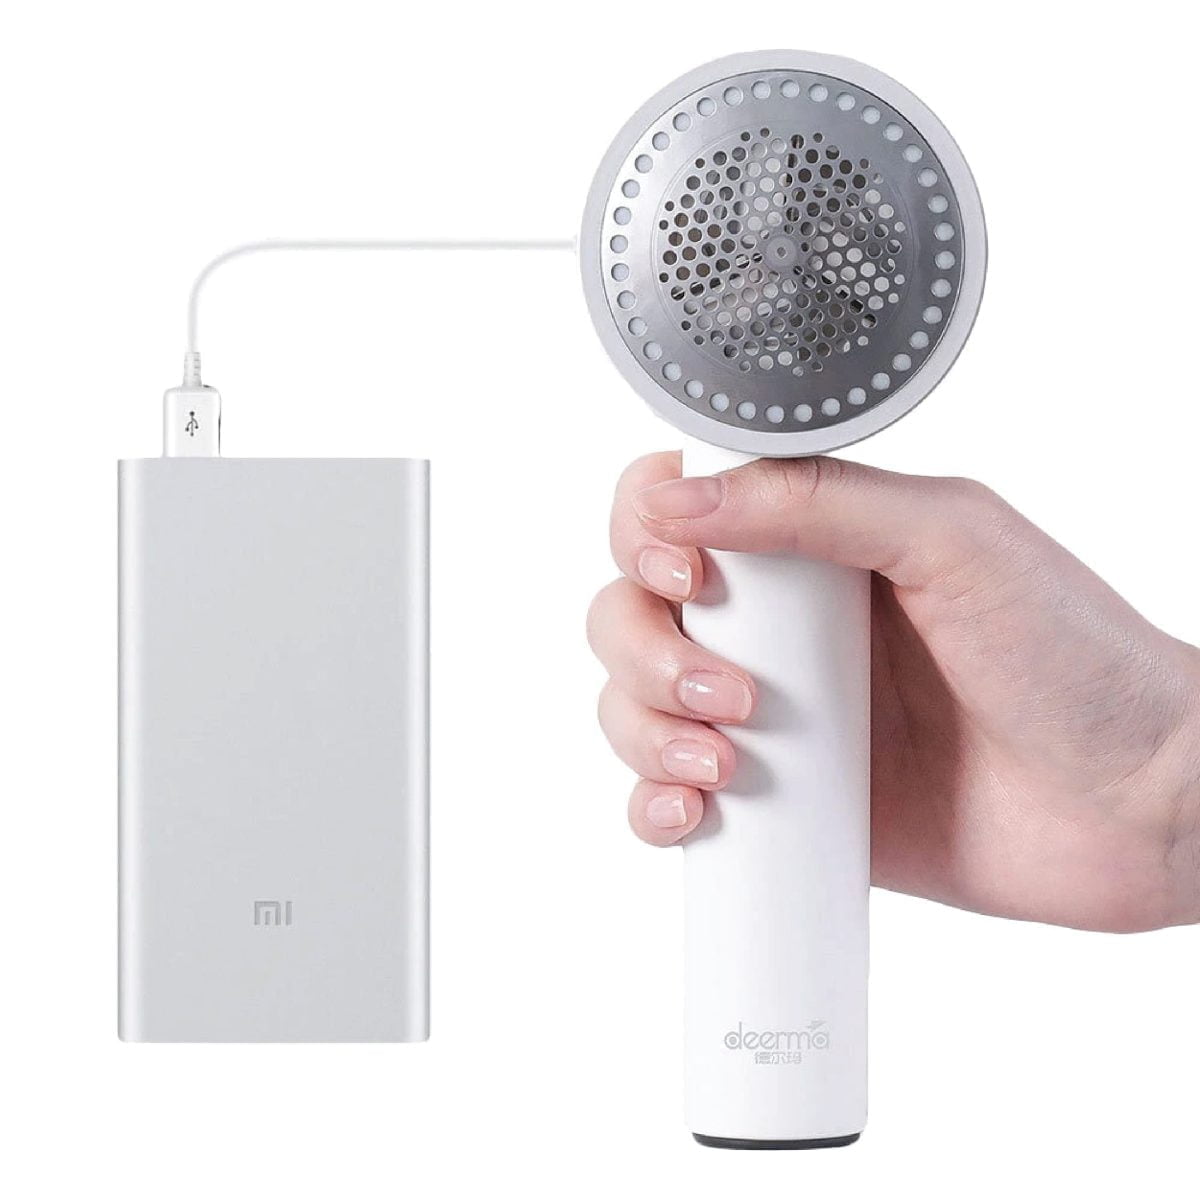 6 05 Xiaomi &Lt;Strong&Gt;Deerma Clothes Sticky Hair Multi-Function Trimmer Charge Plug-In 7000R / Min Motor Fast Removal Ball&Lt;/Strong&Gt; Concealed Multi-Purpose Sticky Hair Tube Easily Remove Dander, Clean As New. The &Lt;Strong&Gt;Sticky Hair Tube&Lt;/Strong&Gt; Is Hidden At The Handle To Maximize The Space Utilization. Pulling It Out Can Absorb The Residual Dander, Effectively Preventing The Dander And The Clothes Fiber From Winding Up Again. Easy To Operate, Make Clothes New And Fashion Https://Youtu.be/Cbkpzs7Ufpa Xiaomi Xiaomi Deerma Portable Lint Remover Multi-Function Usb Charging